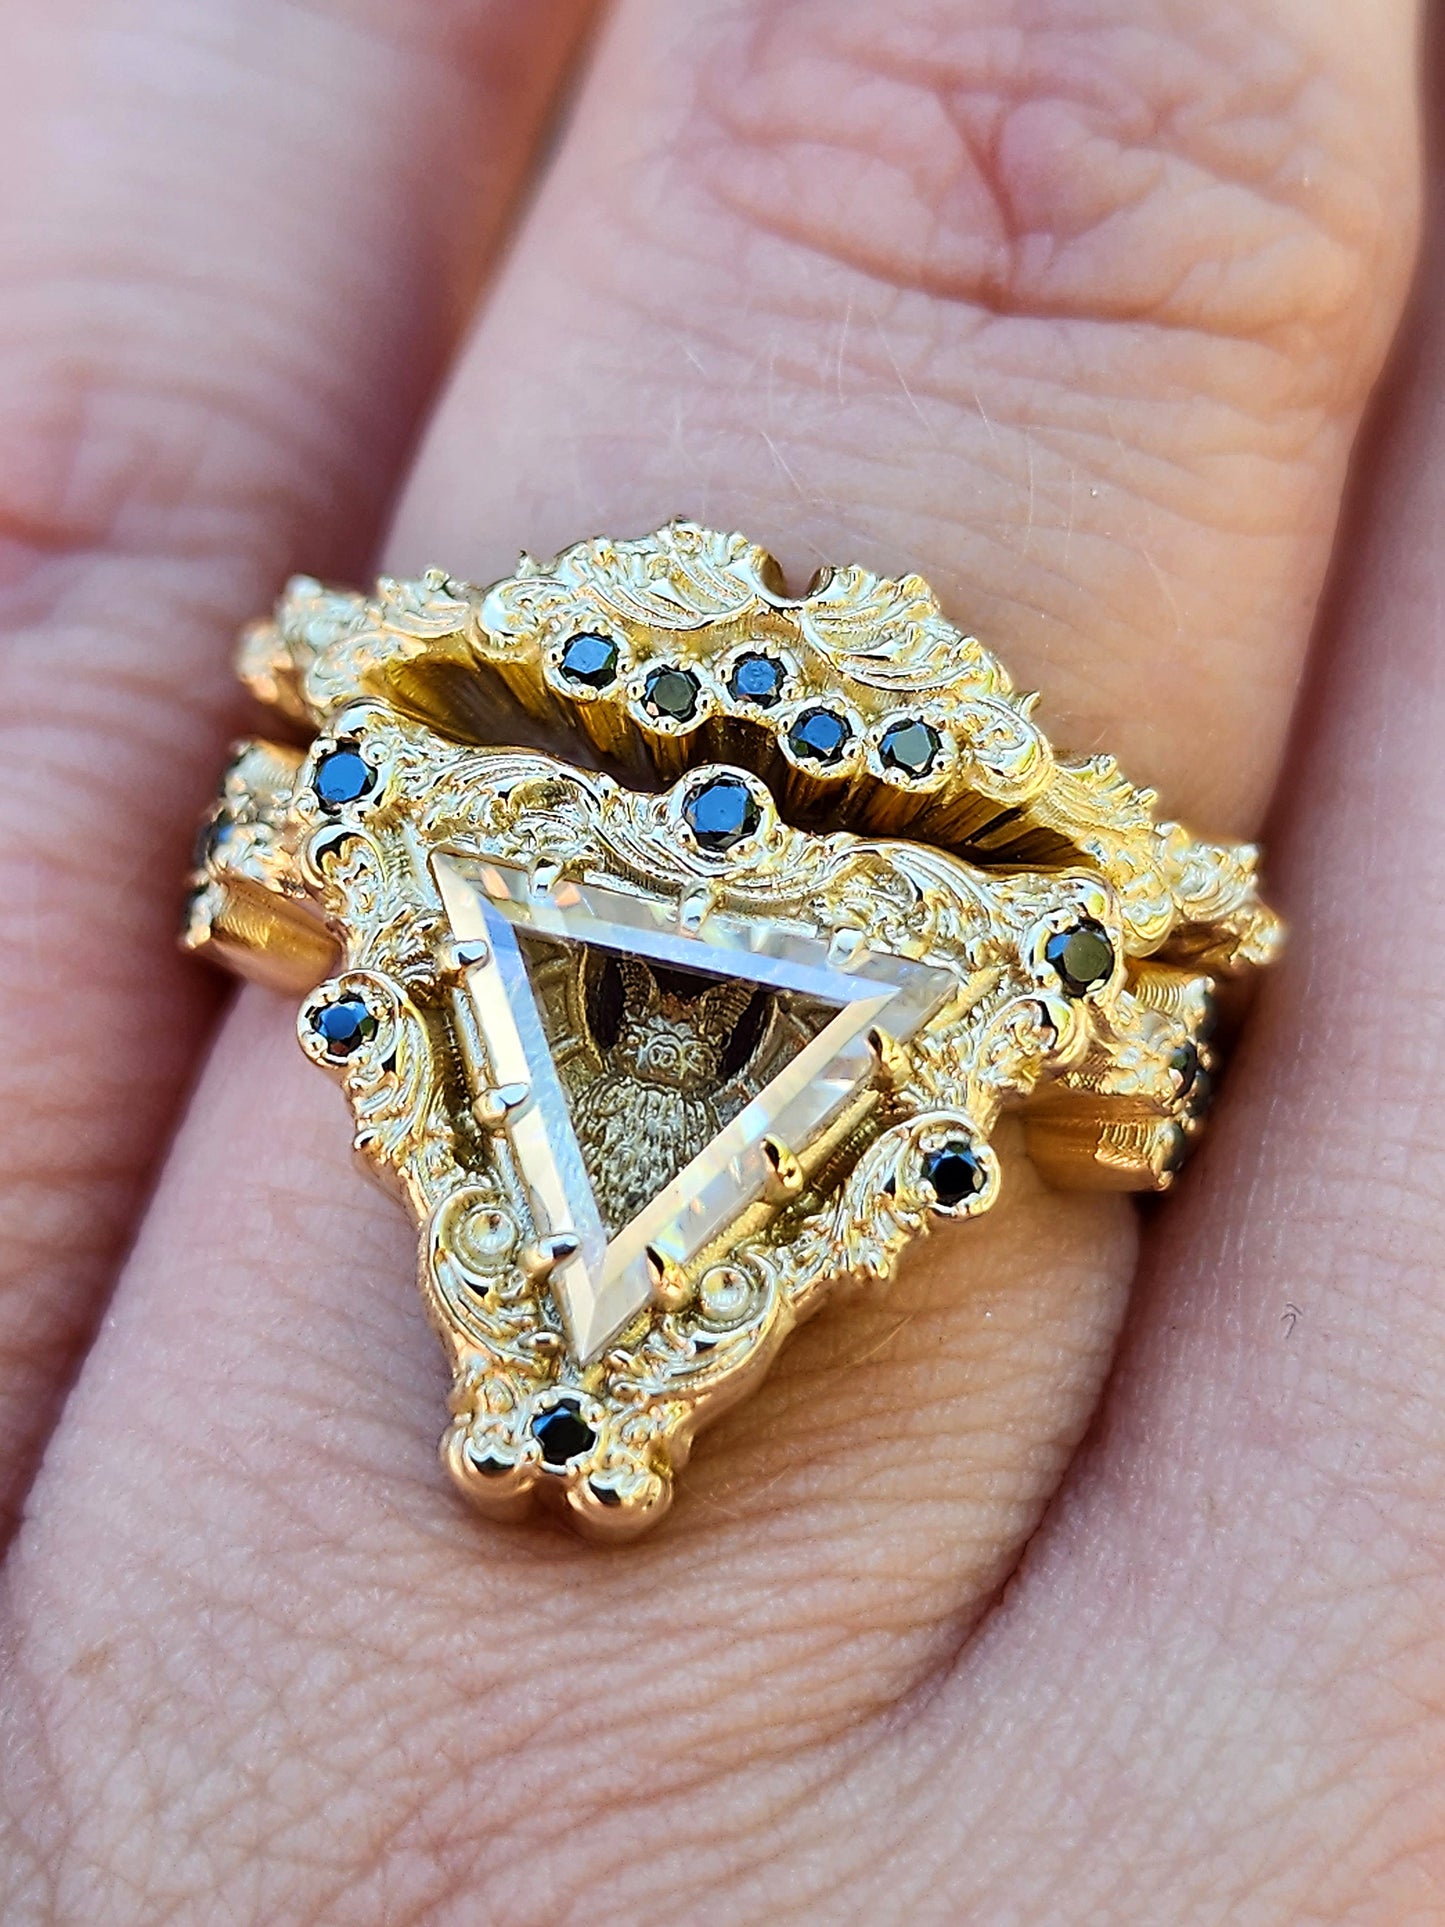 Ready to Ship Victorian Gothic Bat Engagement Ring Shadow Box with Triangle Portrait Cut Moissanite Wedding Ring Set Baroque Scrolls with Black or White Diamonds 14k Gold Ethereal Unique Fine Jewelry